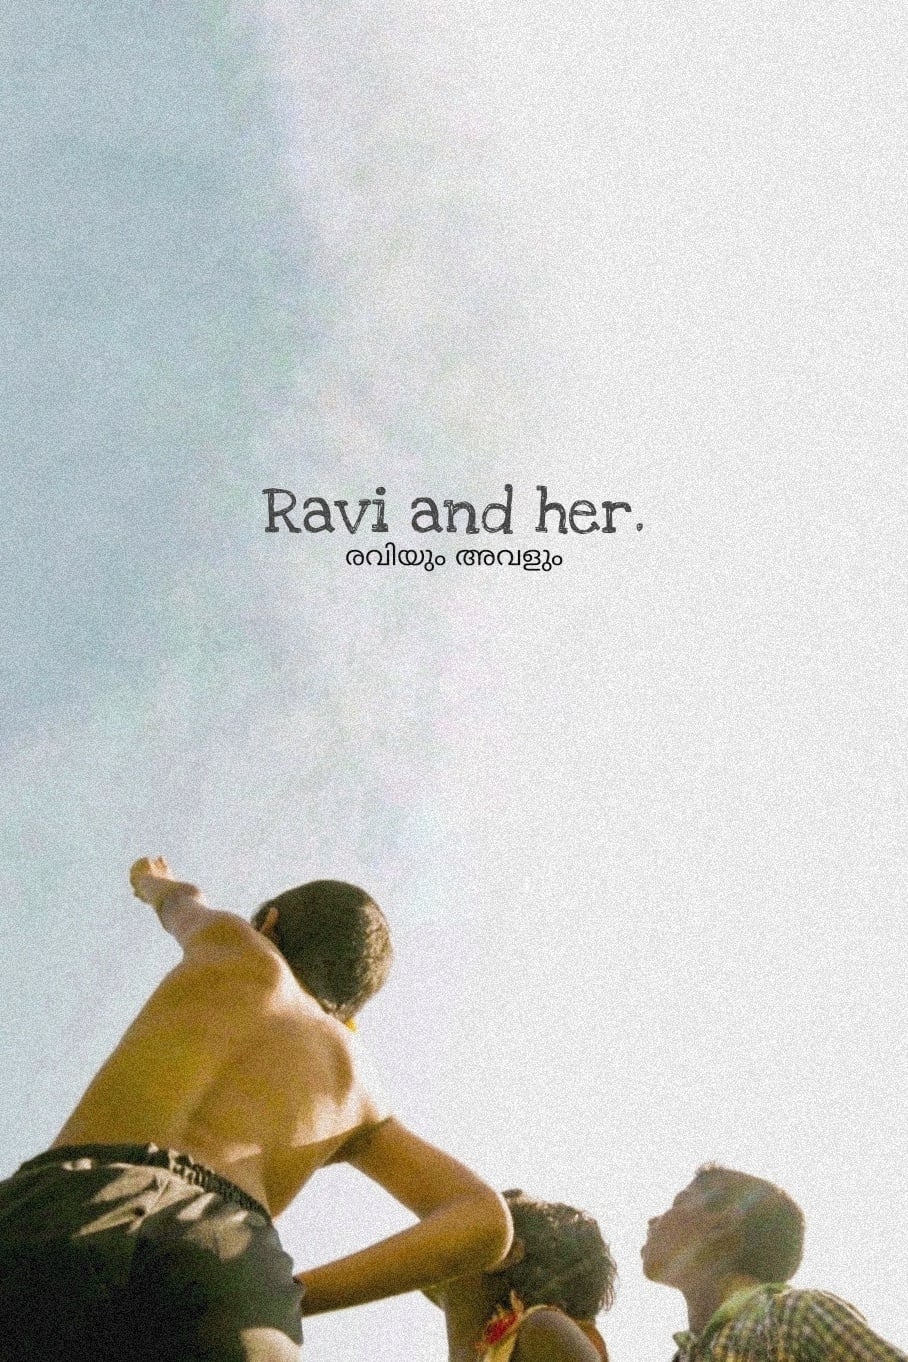 Ravi and her